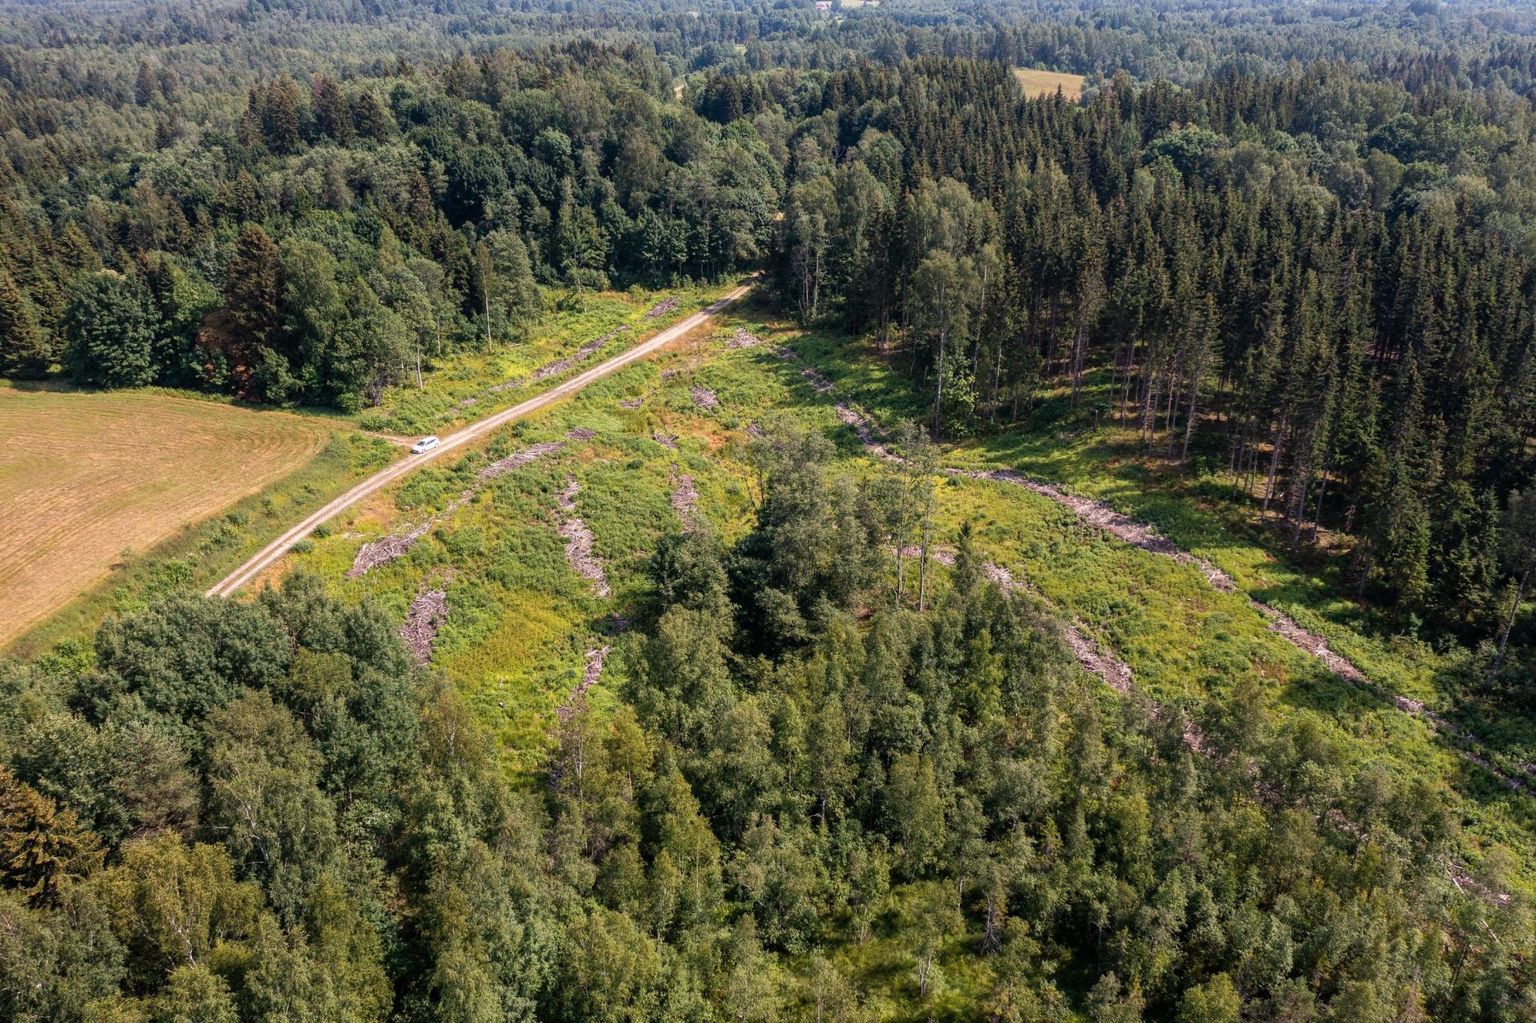 RMK clearcutting also impacted Natura 2000 protected habitats in the Otepää Nature Park.